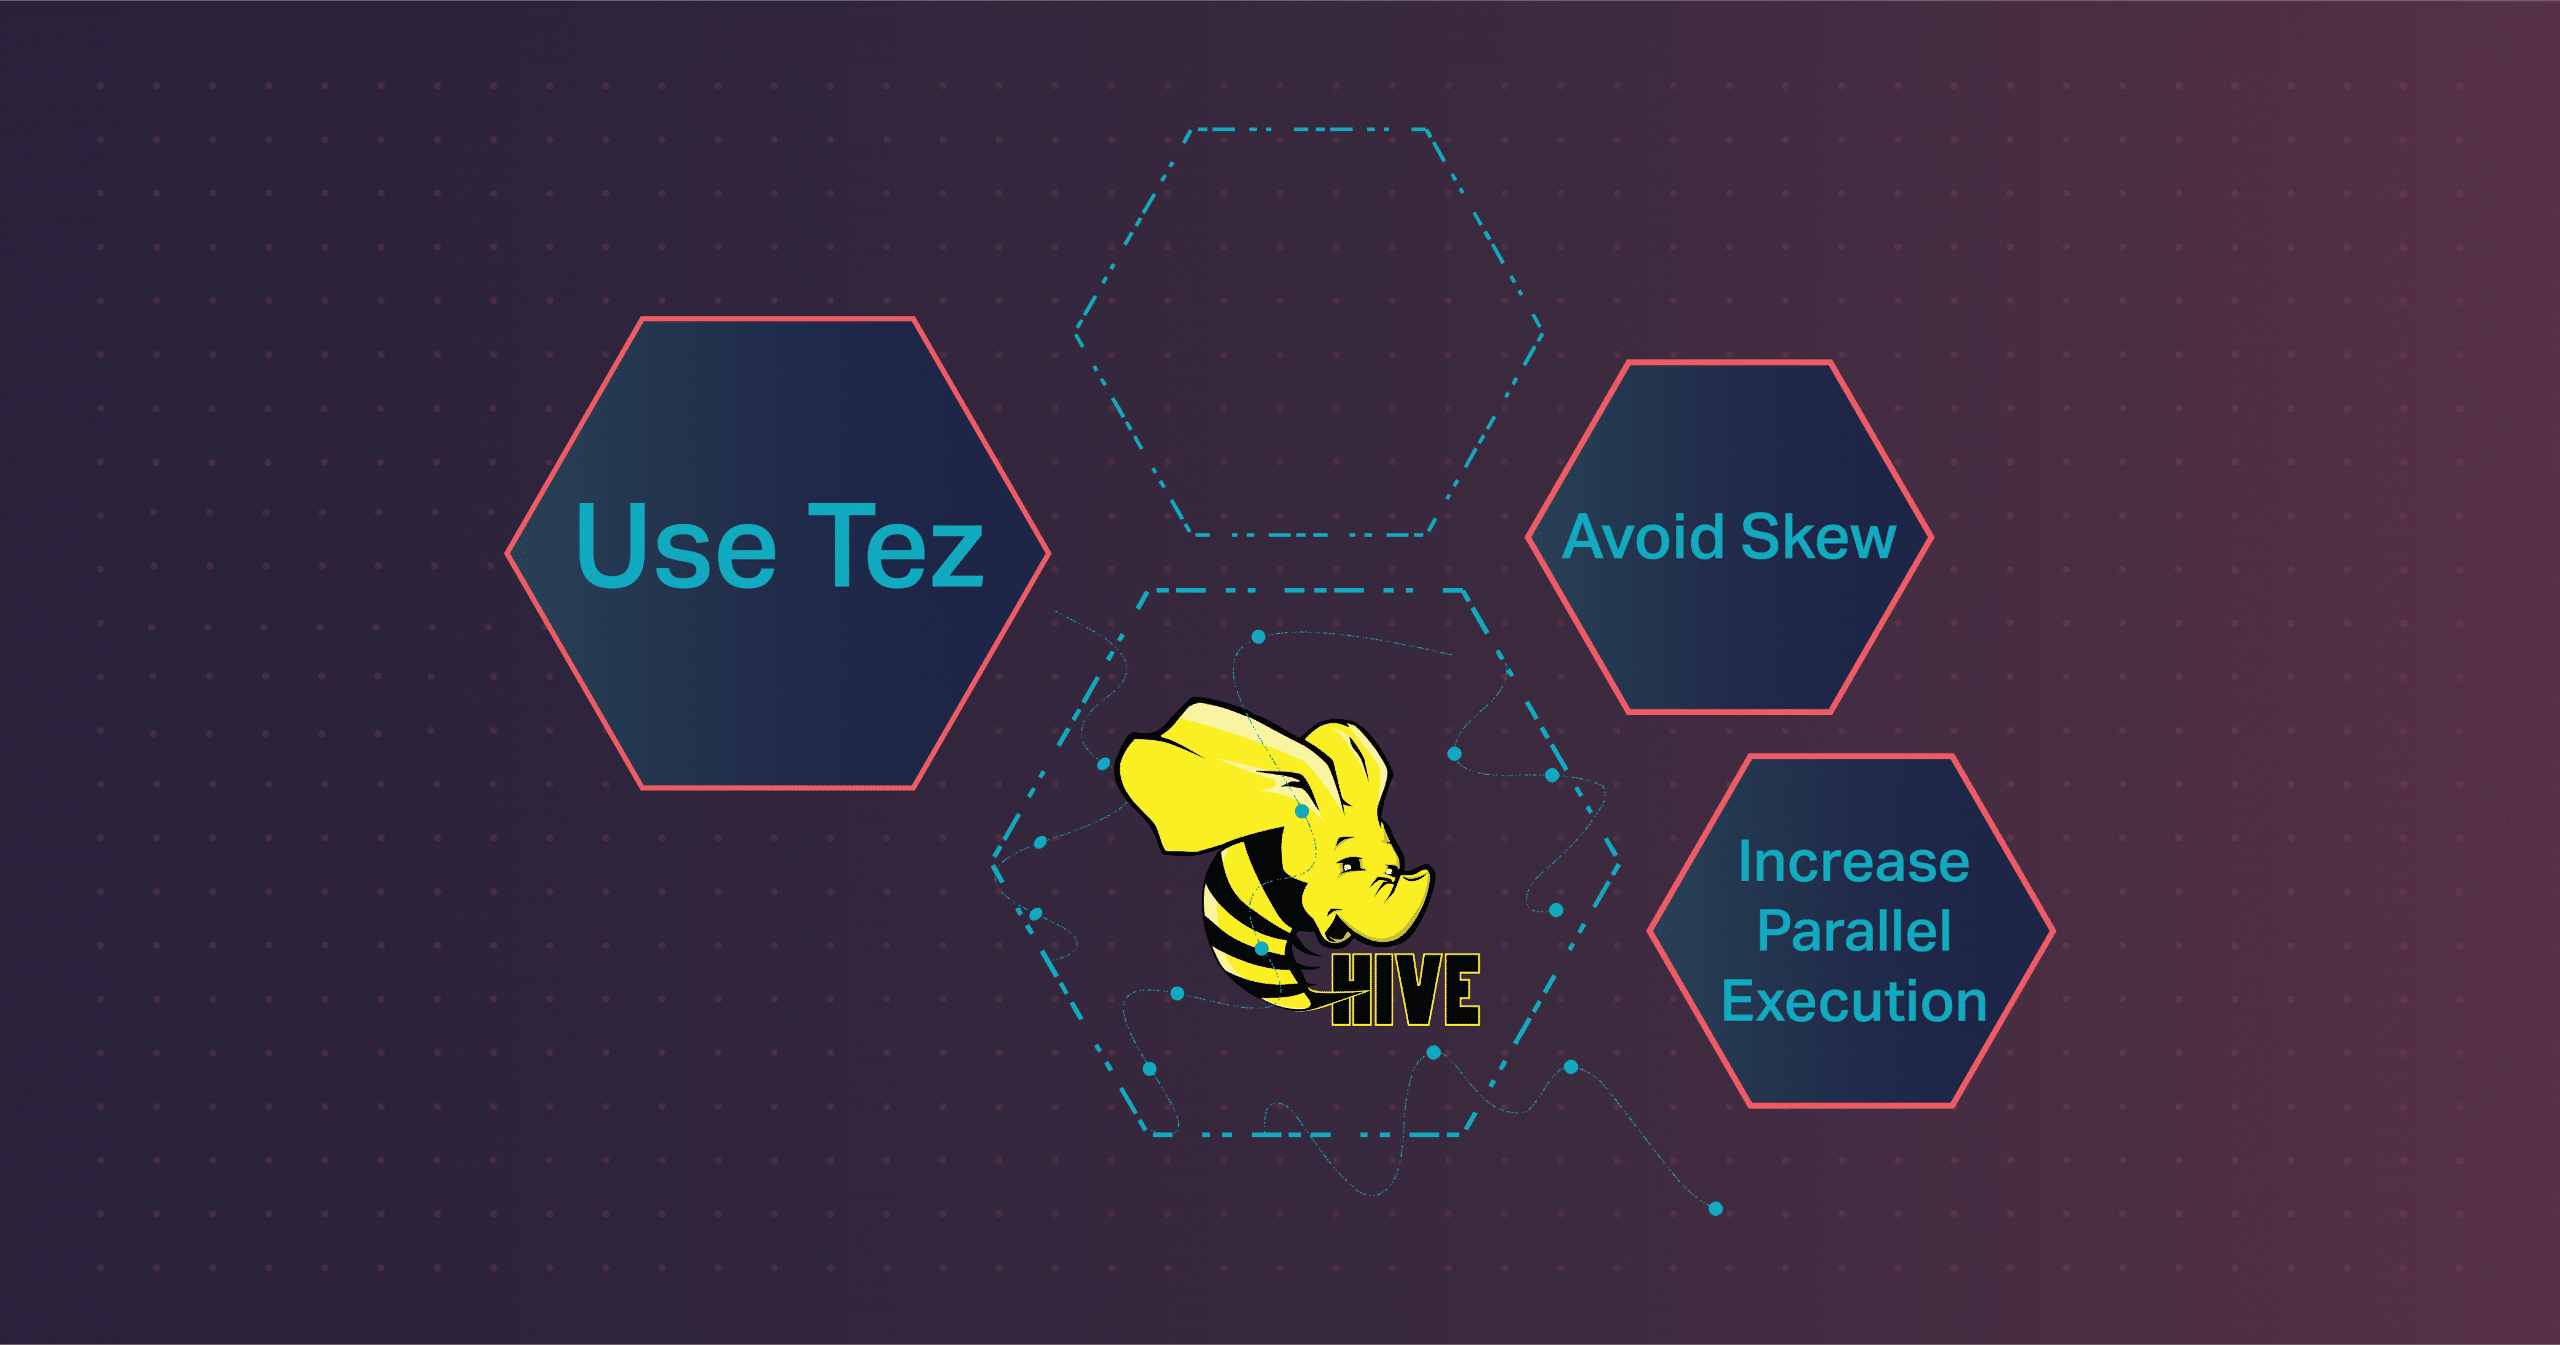 Hive Performance Tuning for Hive Query Optimization